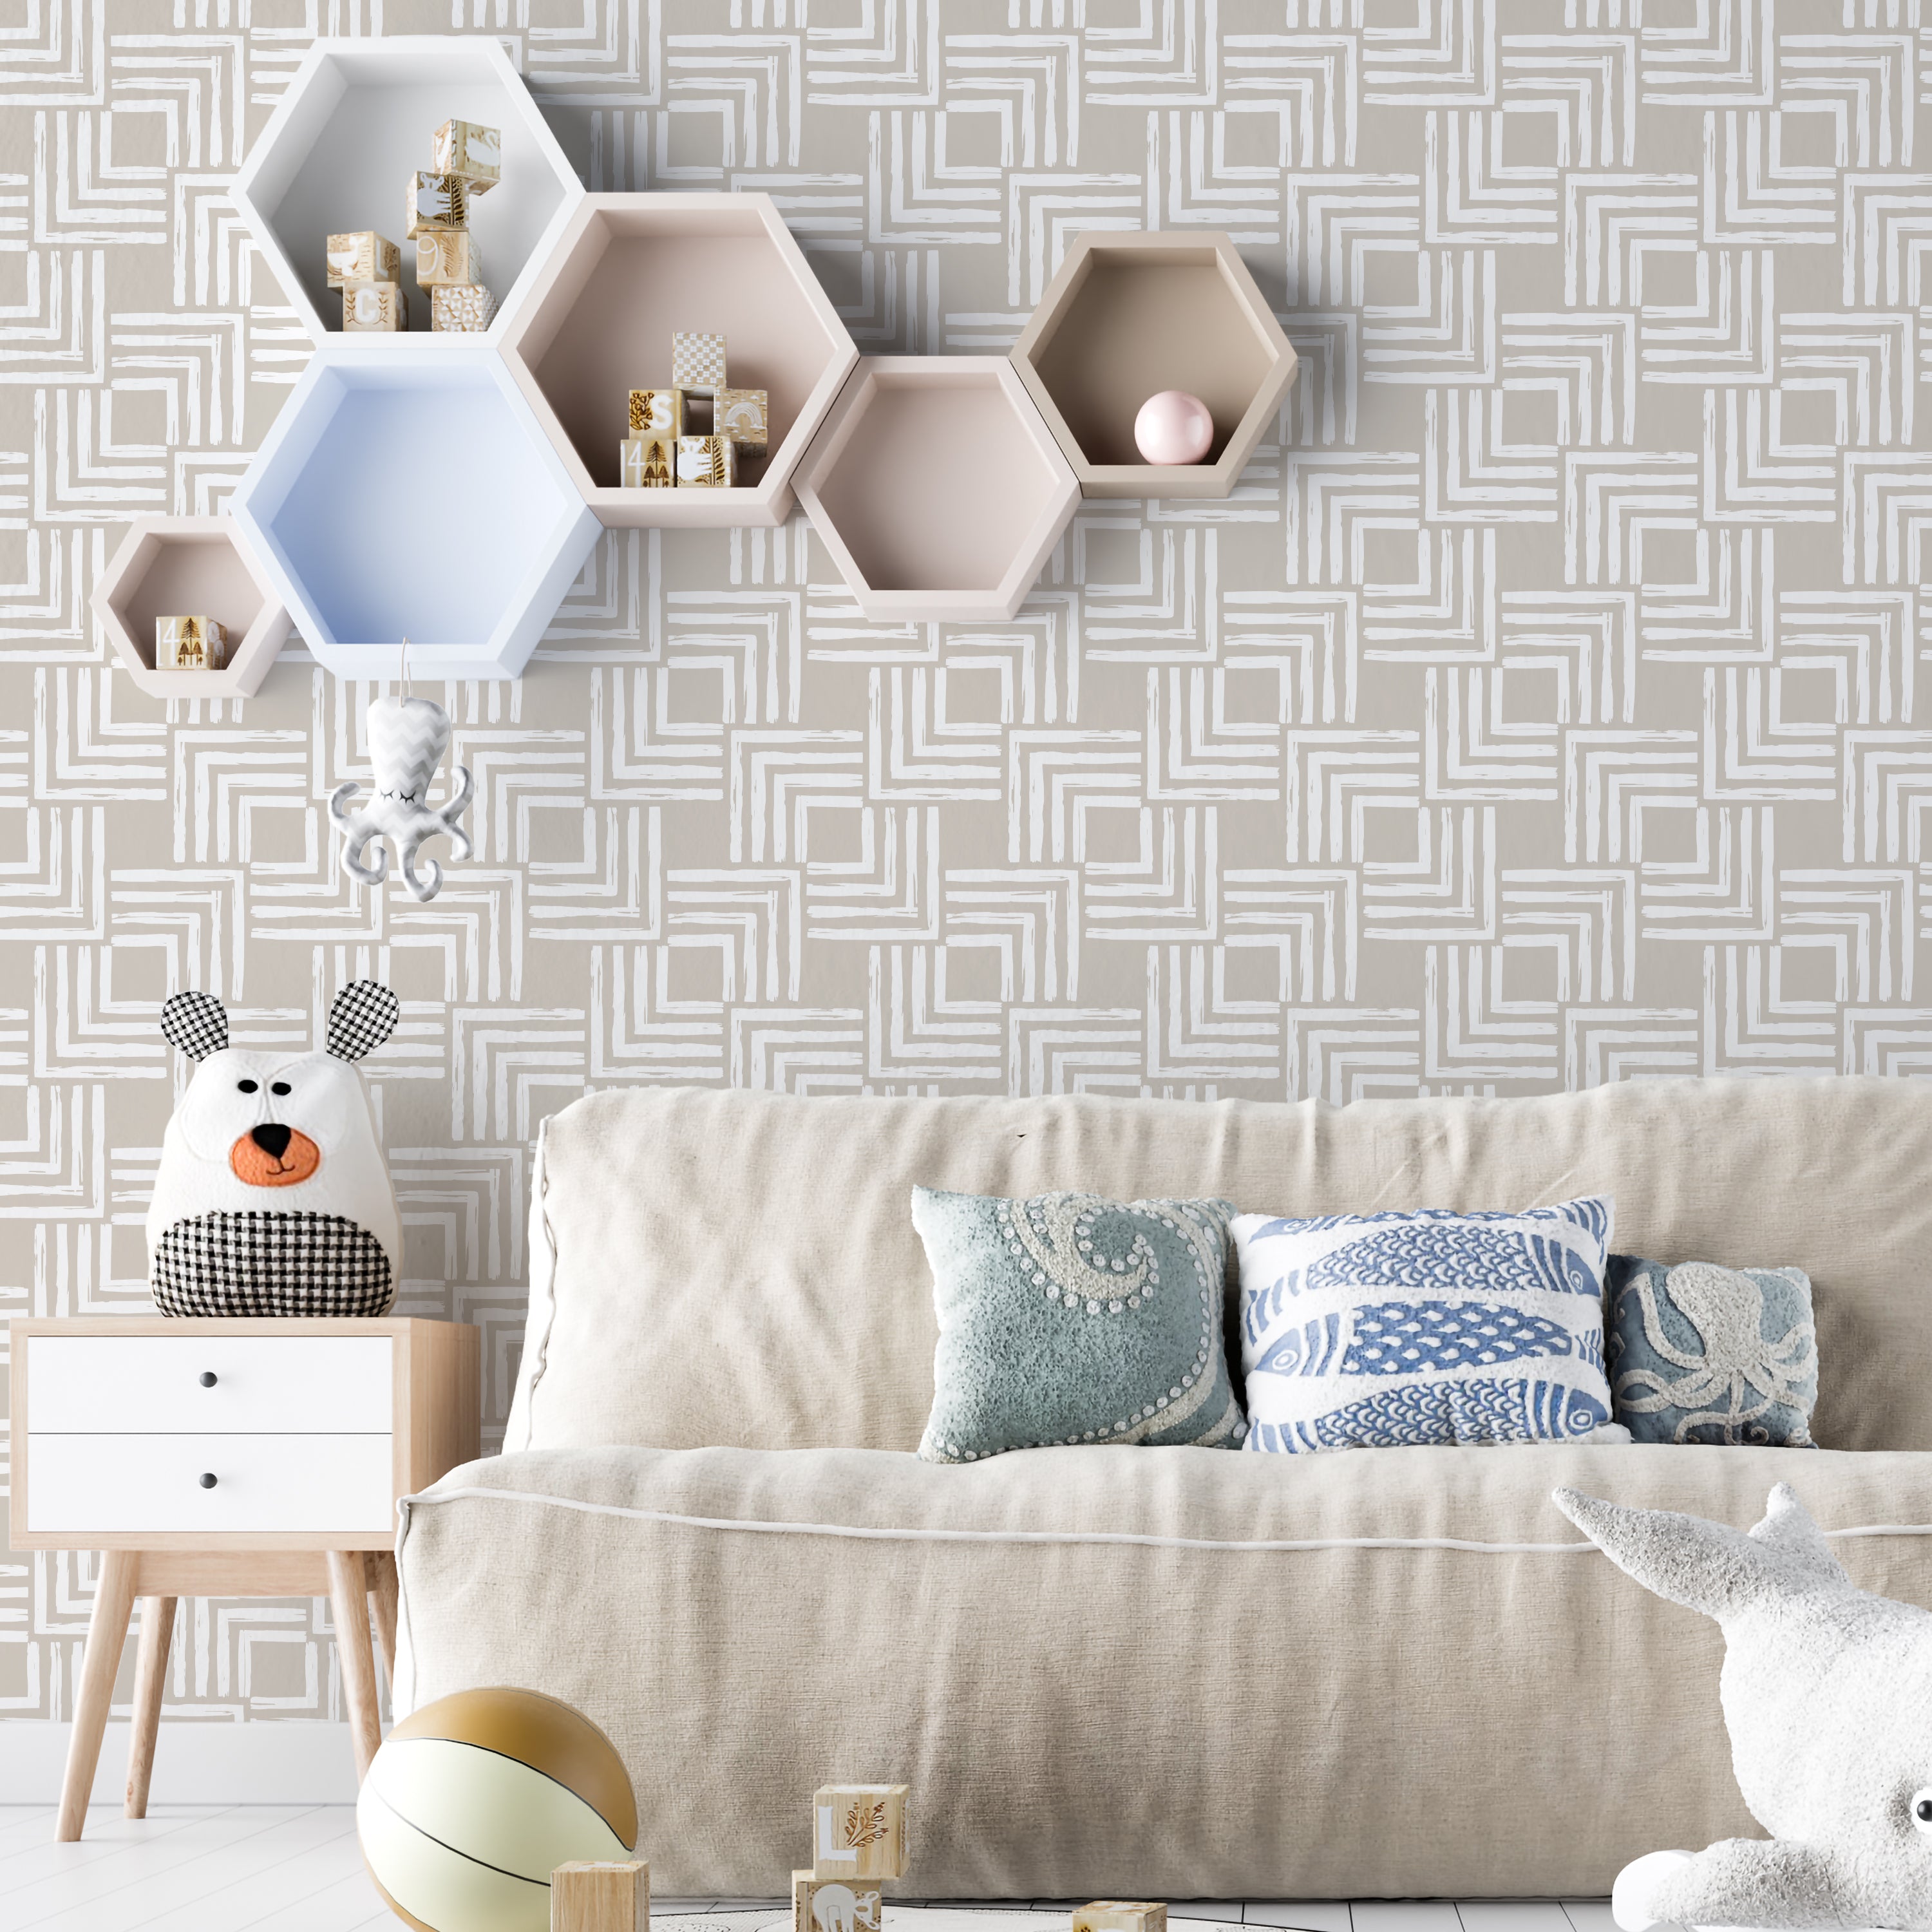 A cozy living room decorated with Organic Wallpaper 3 on the wall, displaying an abstract pattern in taupe. The room includes a beige sofa with decorative cushions, playful stuffed toys, and hexagonal wall shelves, creating a warm, inviting ambiance